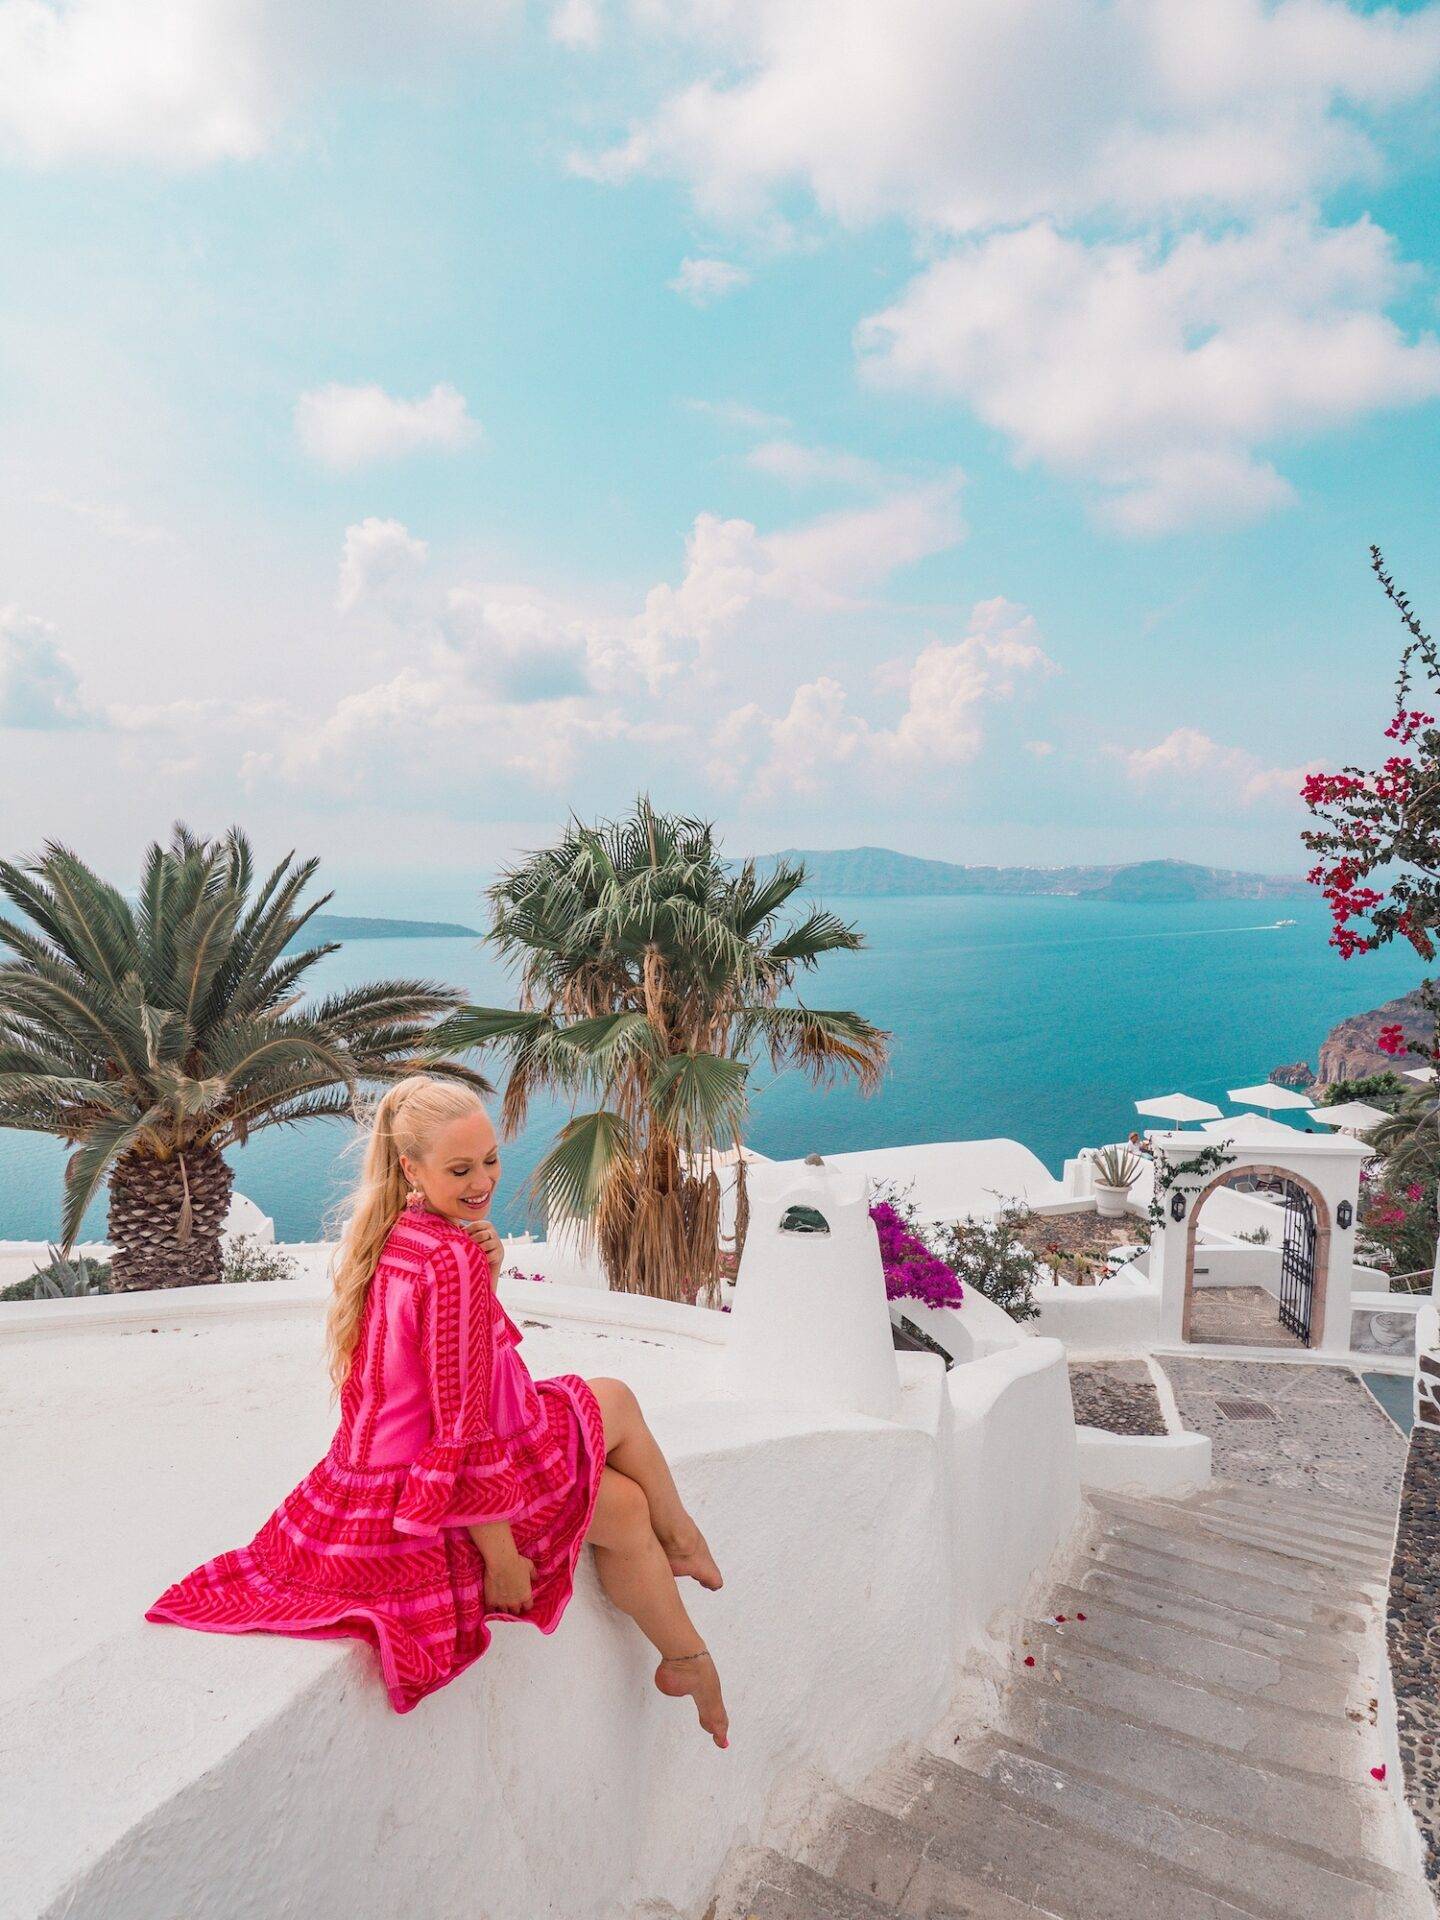 The best photo spots and most instagrammable places in Santorini: Unique hotel entrances of Fira. Click the photo to see the rest of my list of the best instagram photo spots in Santorini!